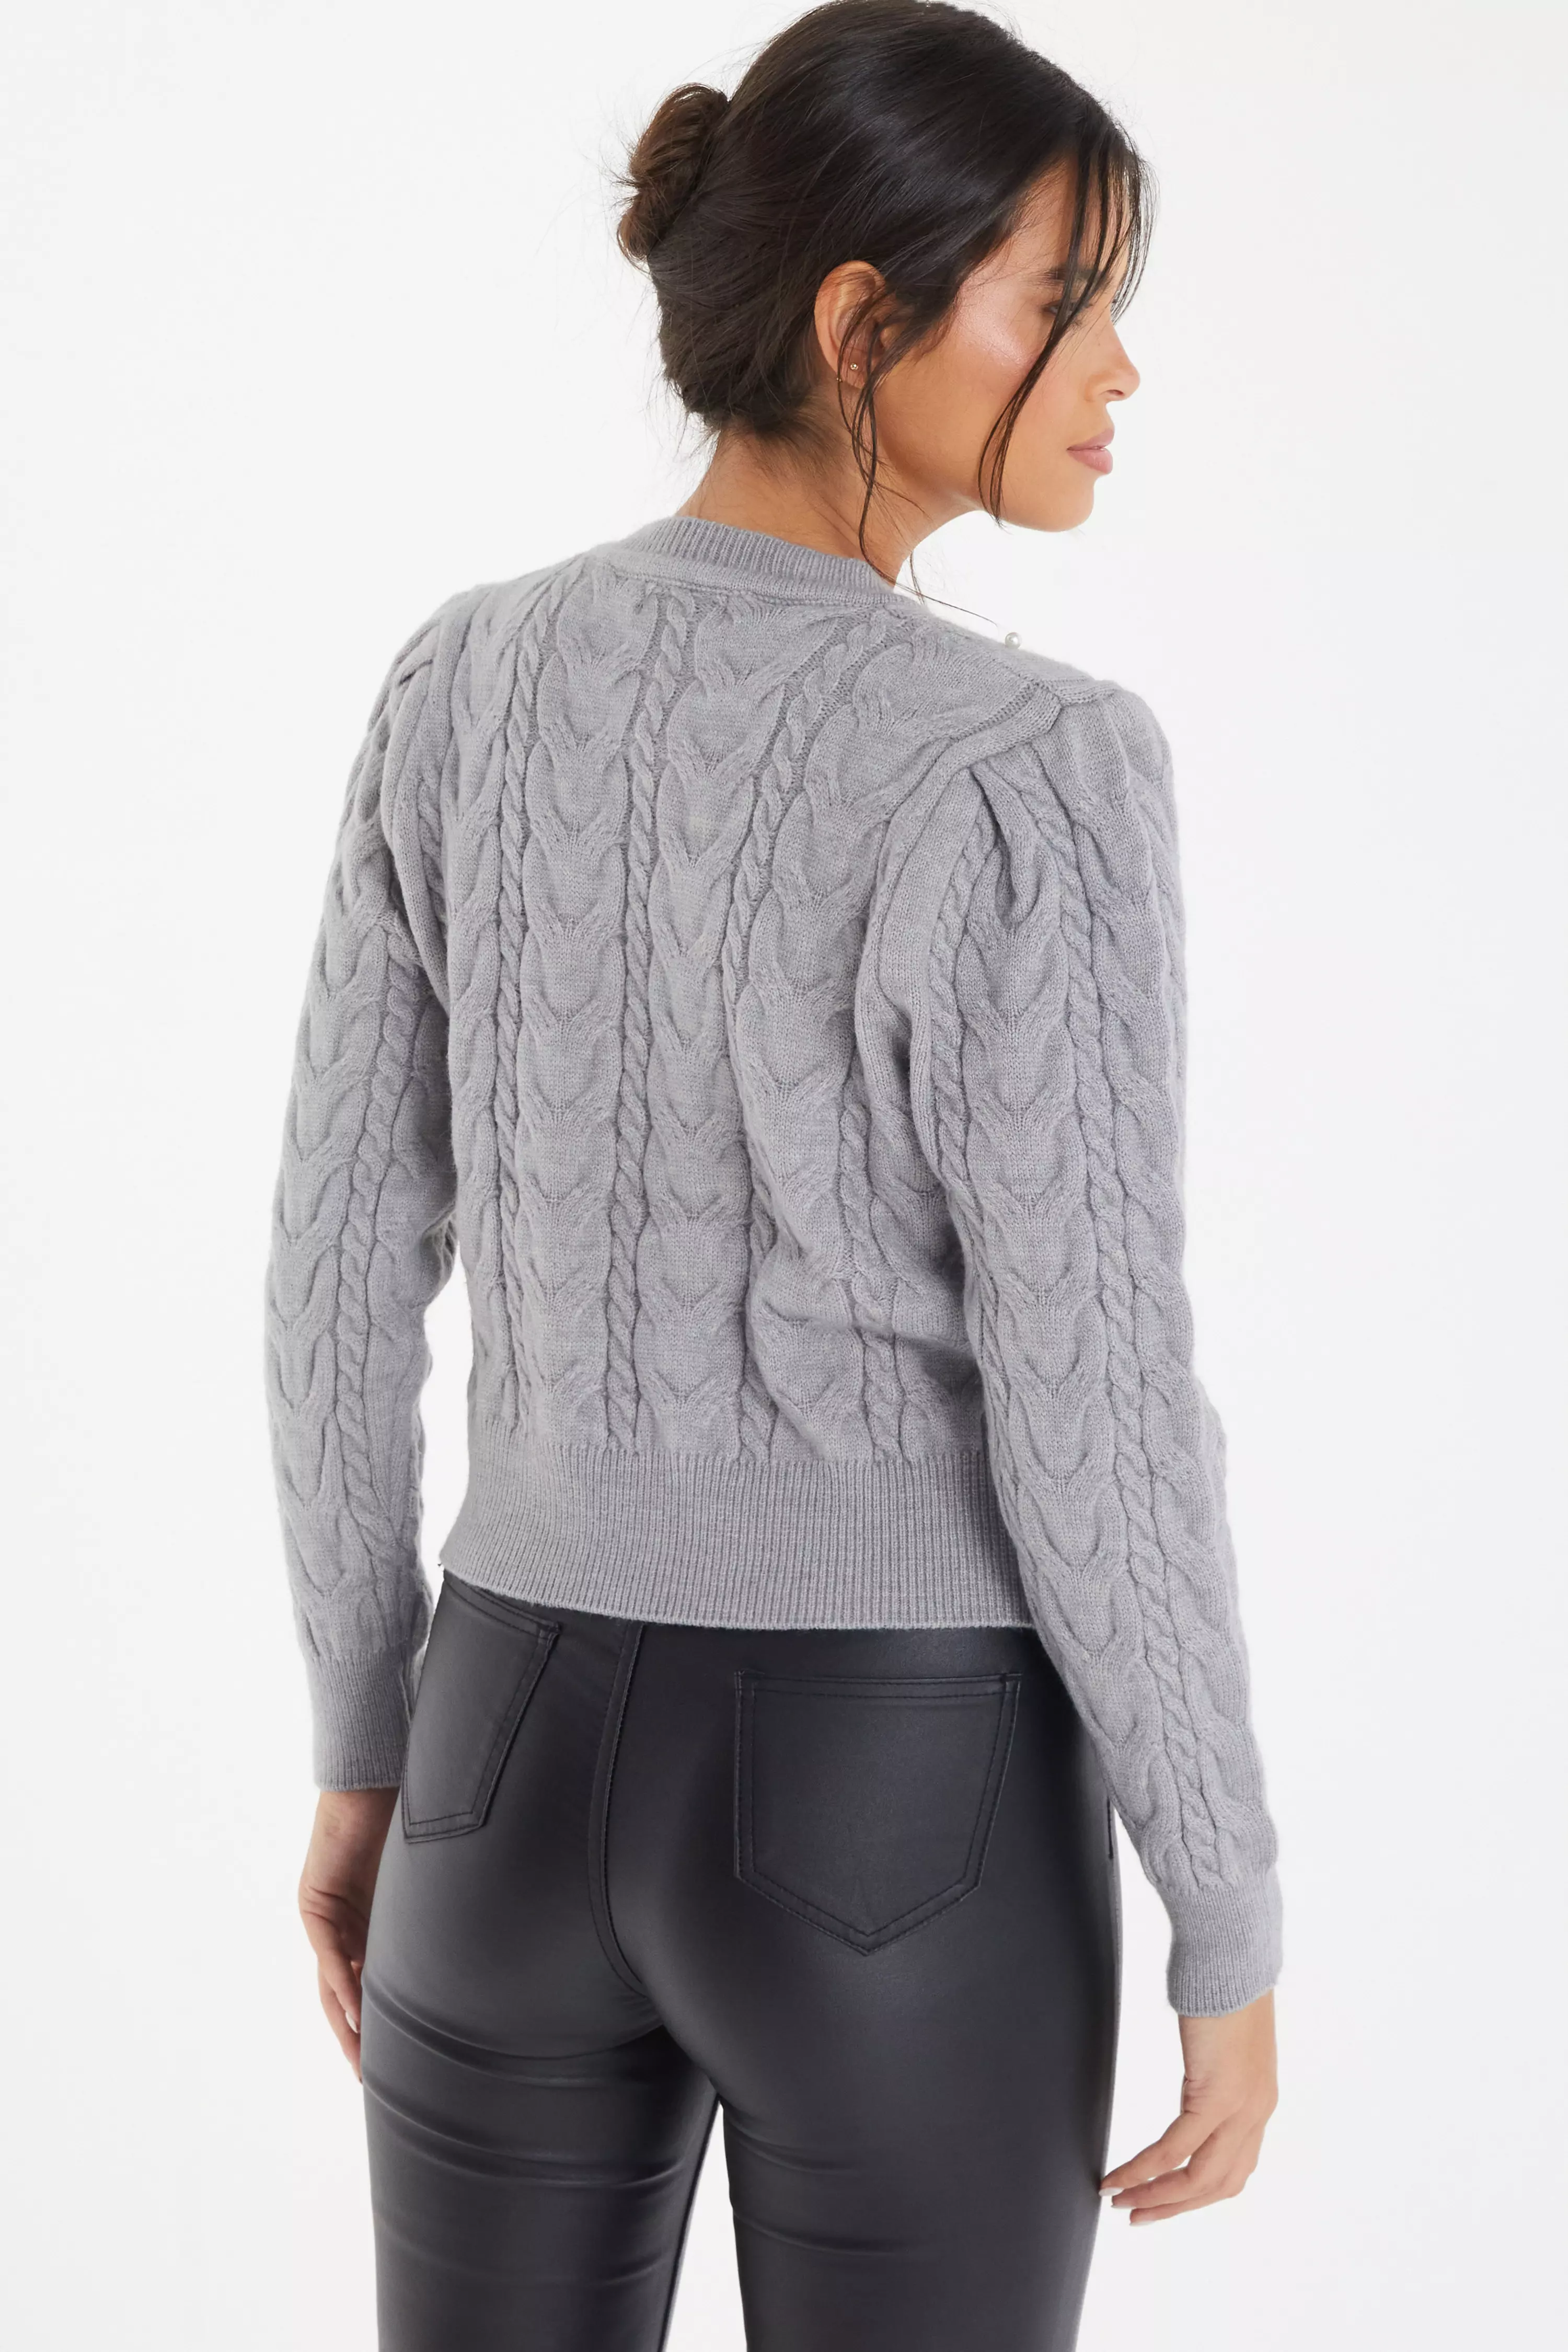 Grey Cable Knit Pearl Jumper